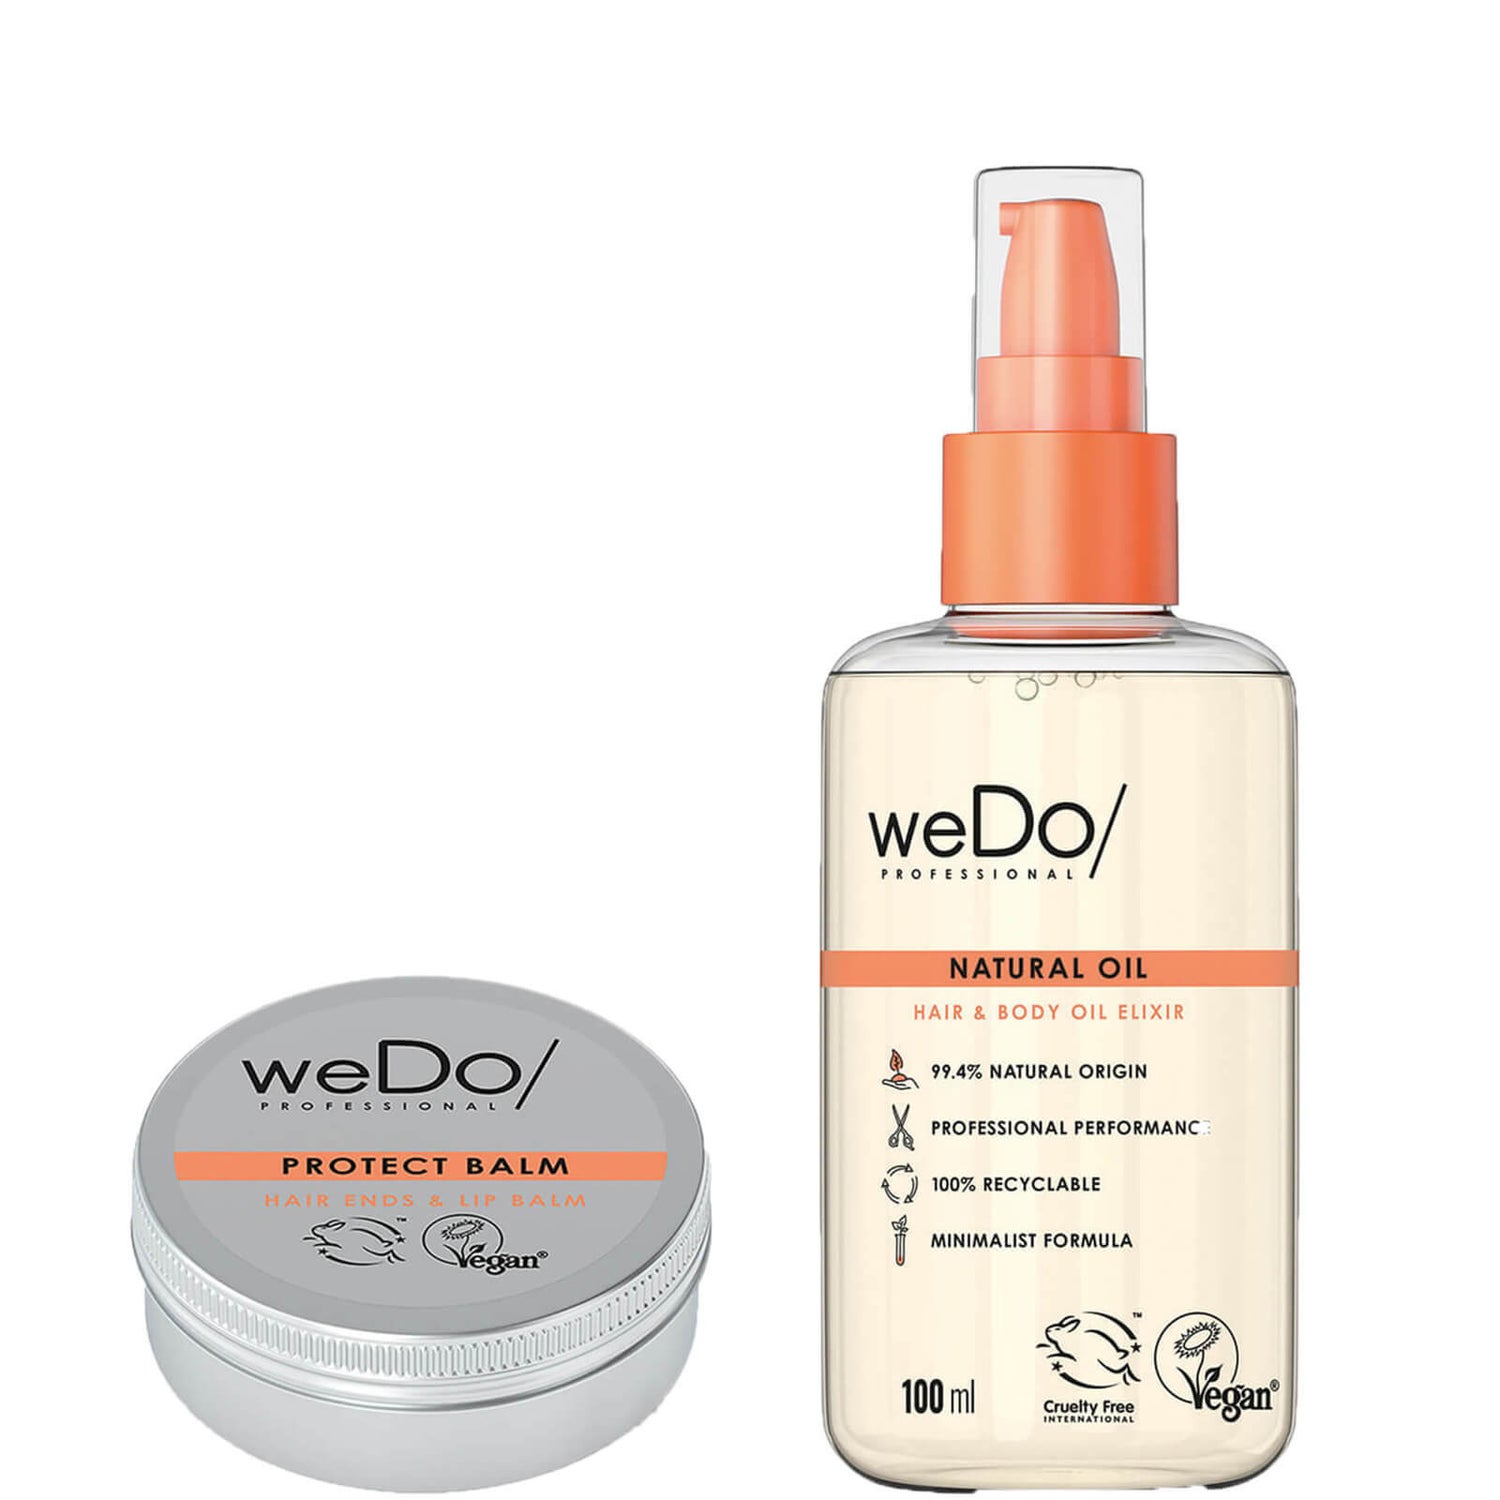 weDo/ Professional Hair and Body Duo